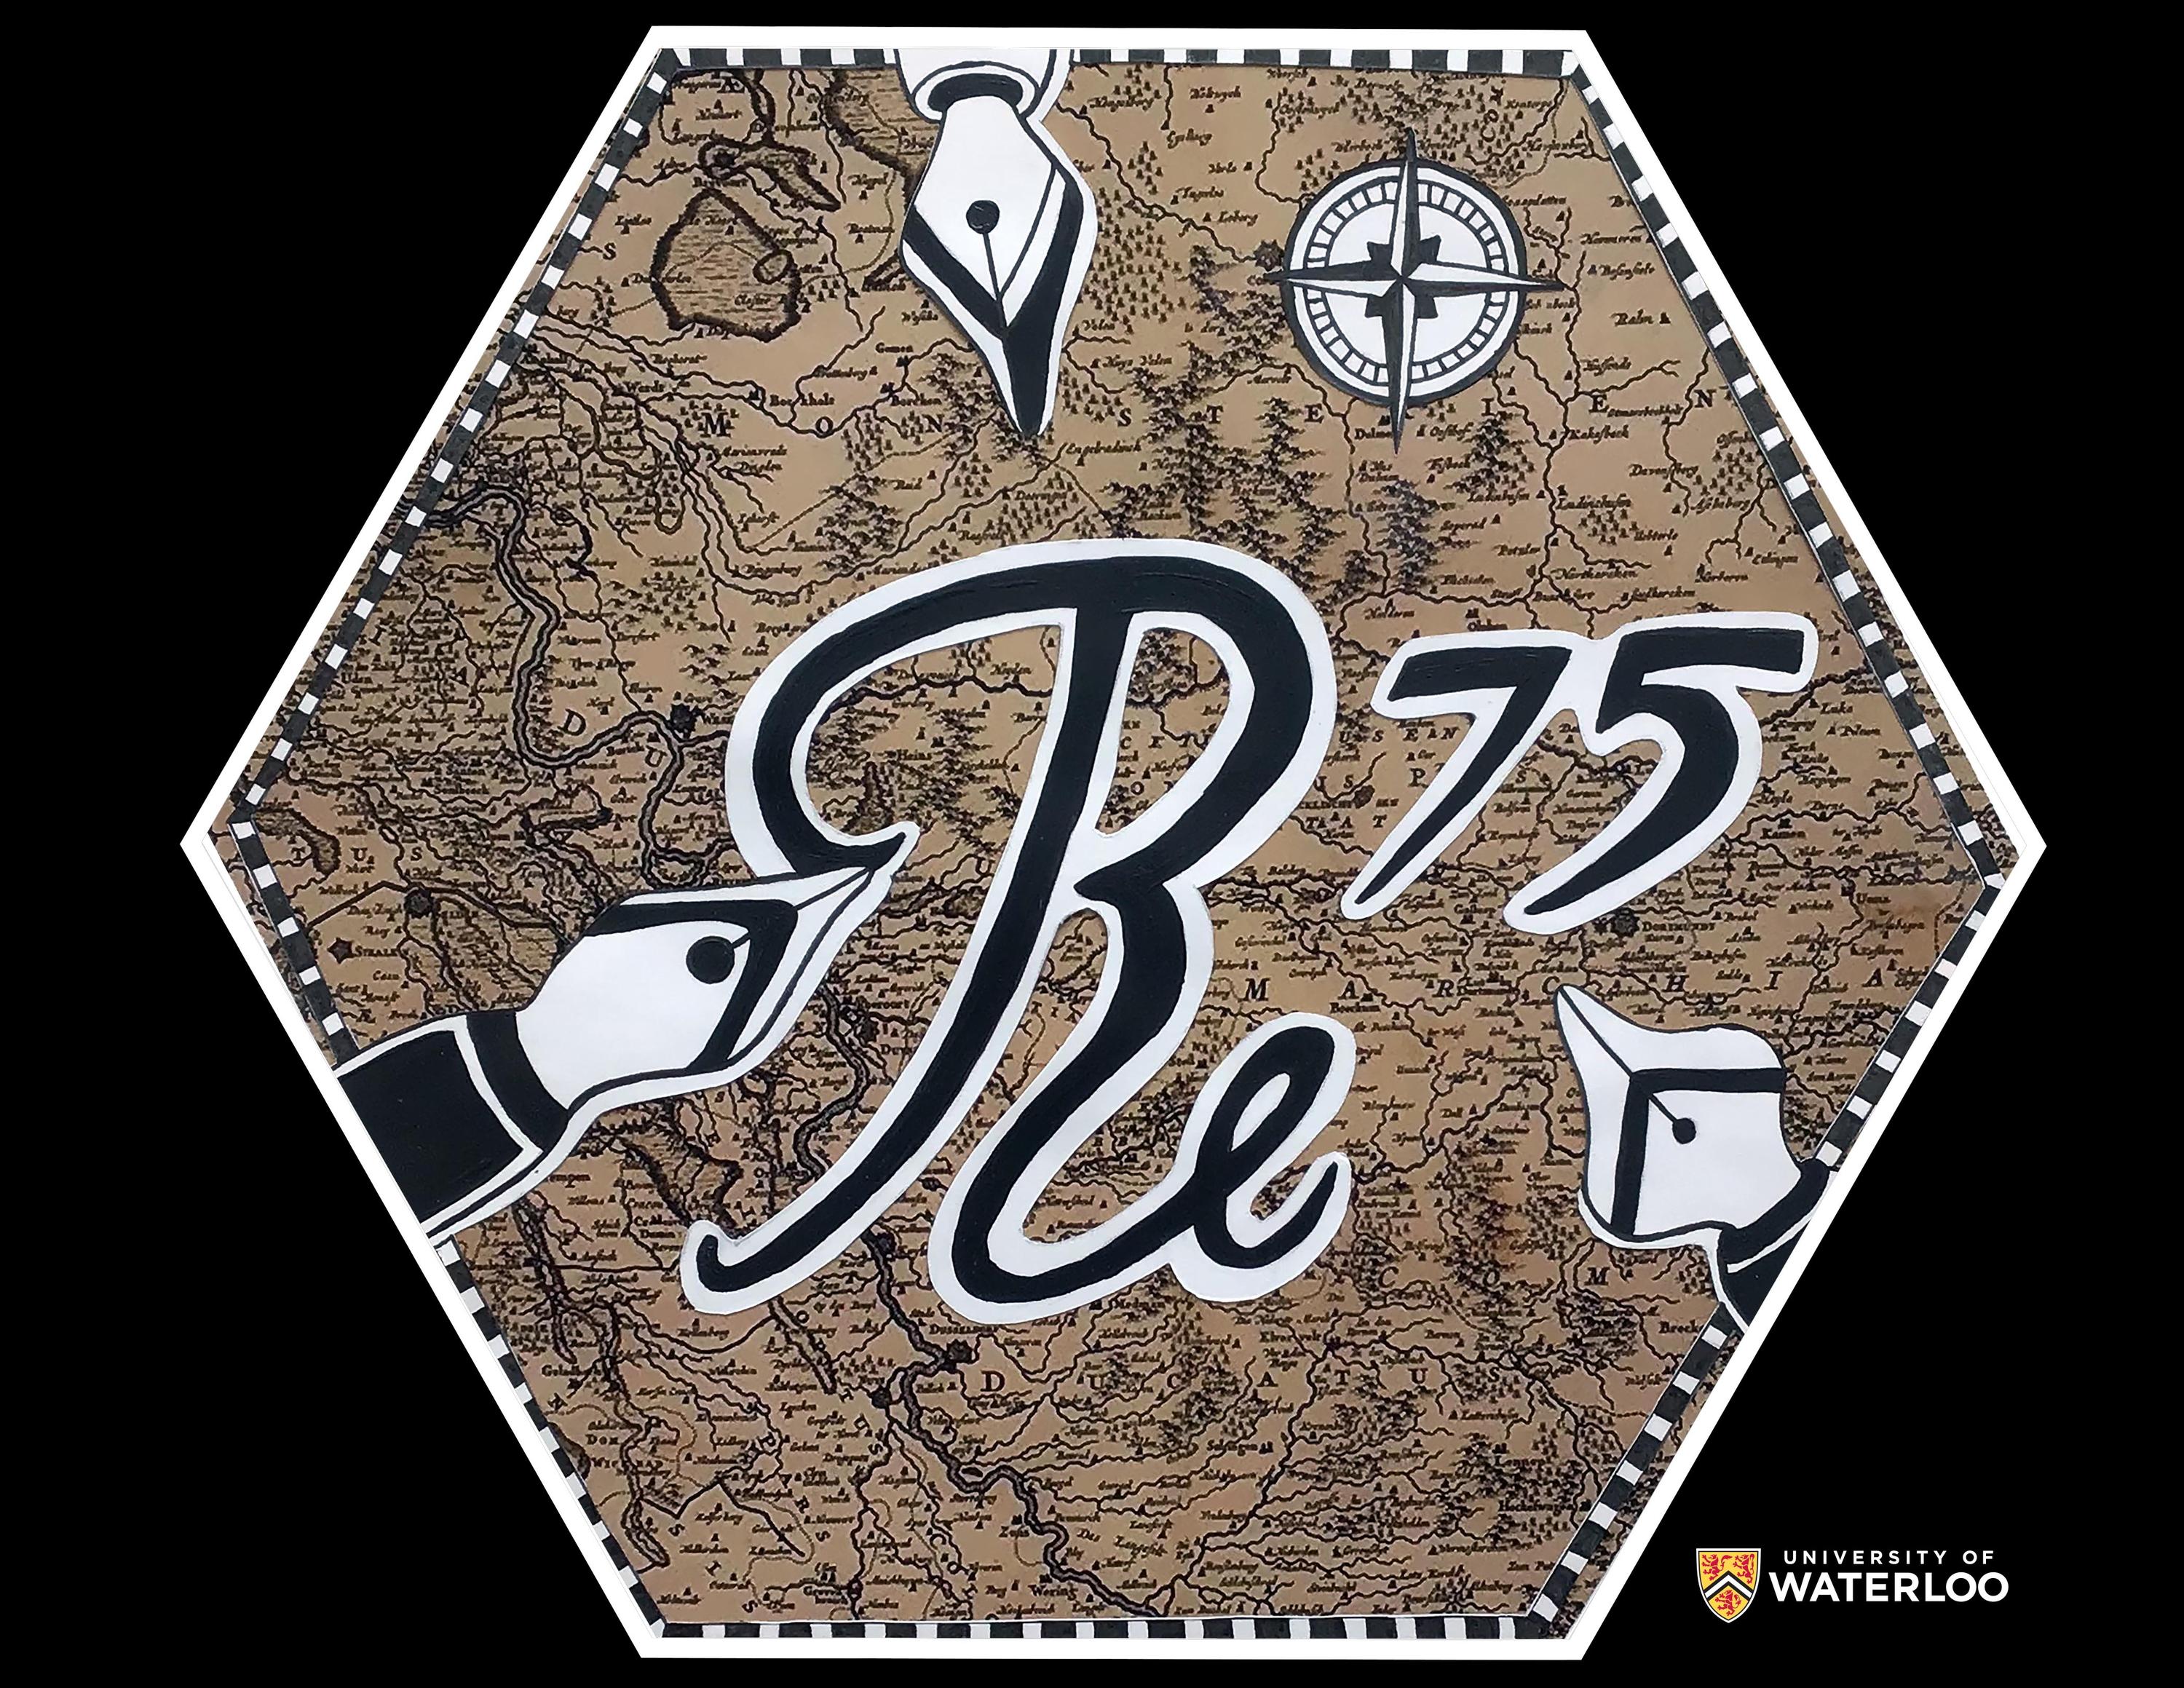 Digital composite. Chemical symbol “Re” and atomic number “75” are centre, both written in cursive script. Three fountain pens heads are pointing centre with a compass in the upper righthand side. The background is a 1690 map of the Rhine Valley in Germany.